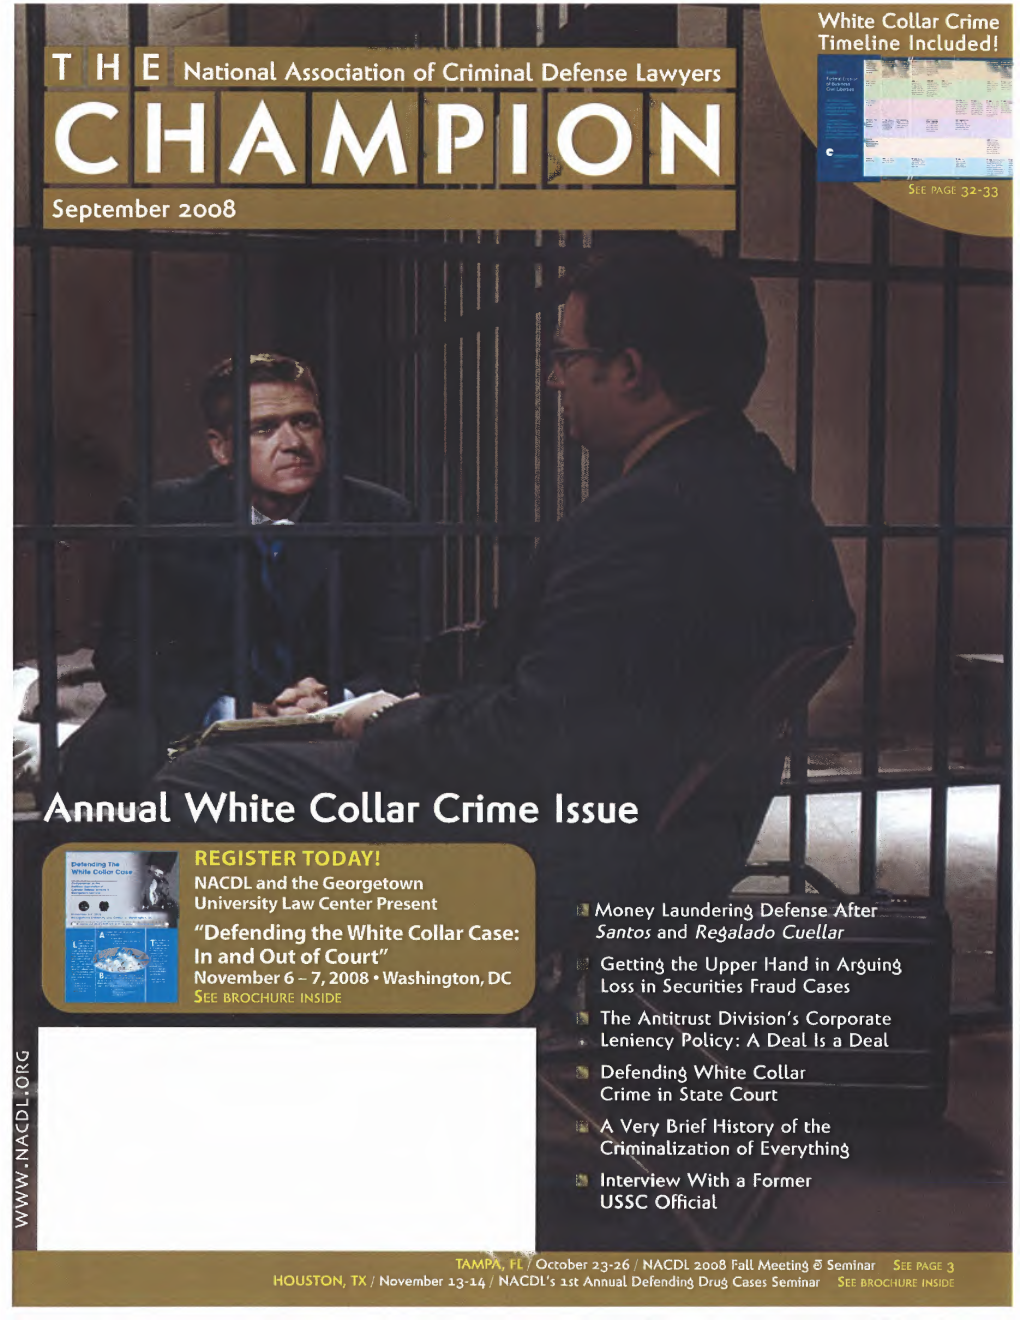 Annual White Collar Crime Issue REGISTER TODAY! NACDL and the Georgetown University Law Center Present Money Laundering Defense Aftei